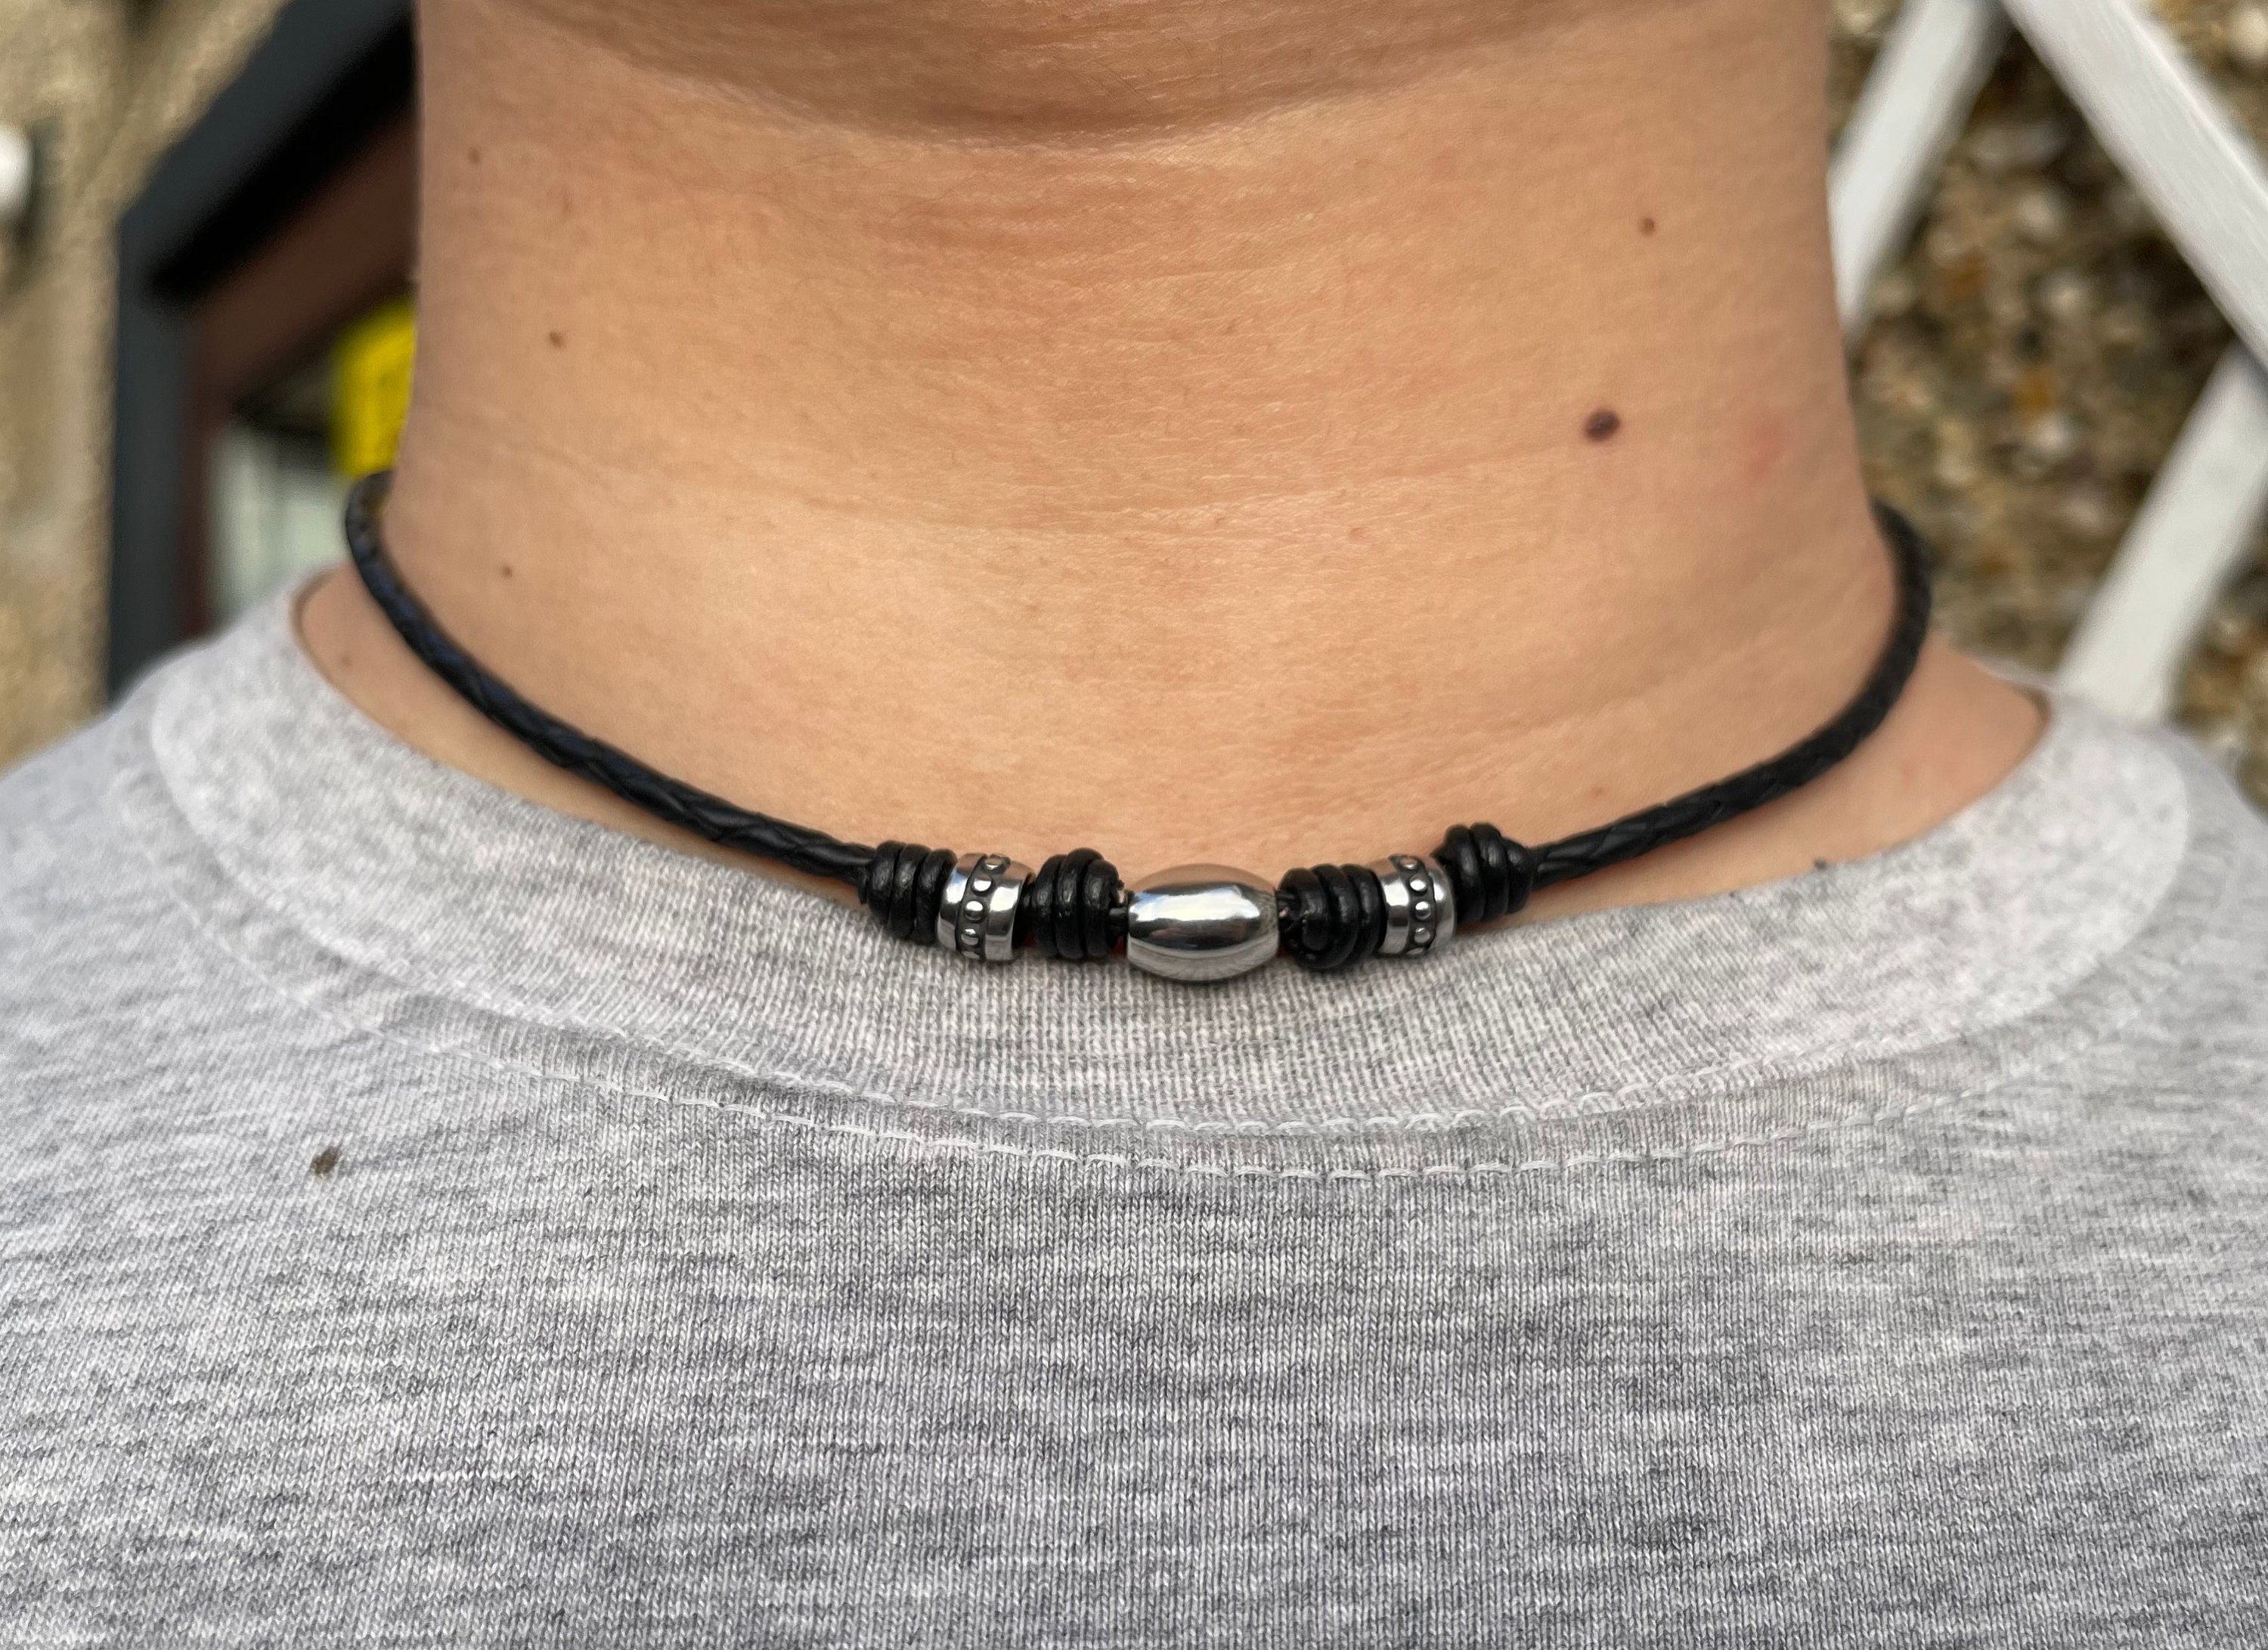 Leather Cord Necklace for Men, Men's Choker Necklace - Unisex Silver Tube  Necklace - Mens Jewelry - Mens Necklace - Black Leather Choker for Him